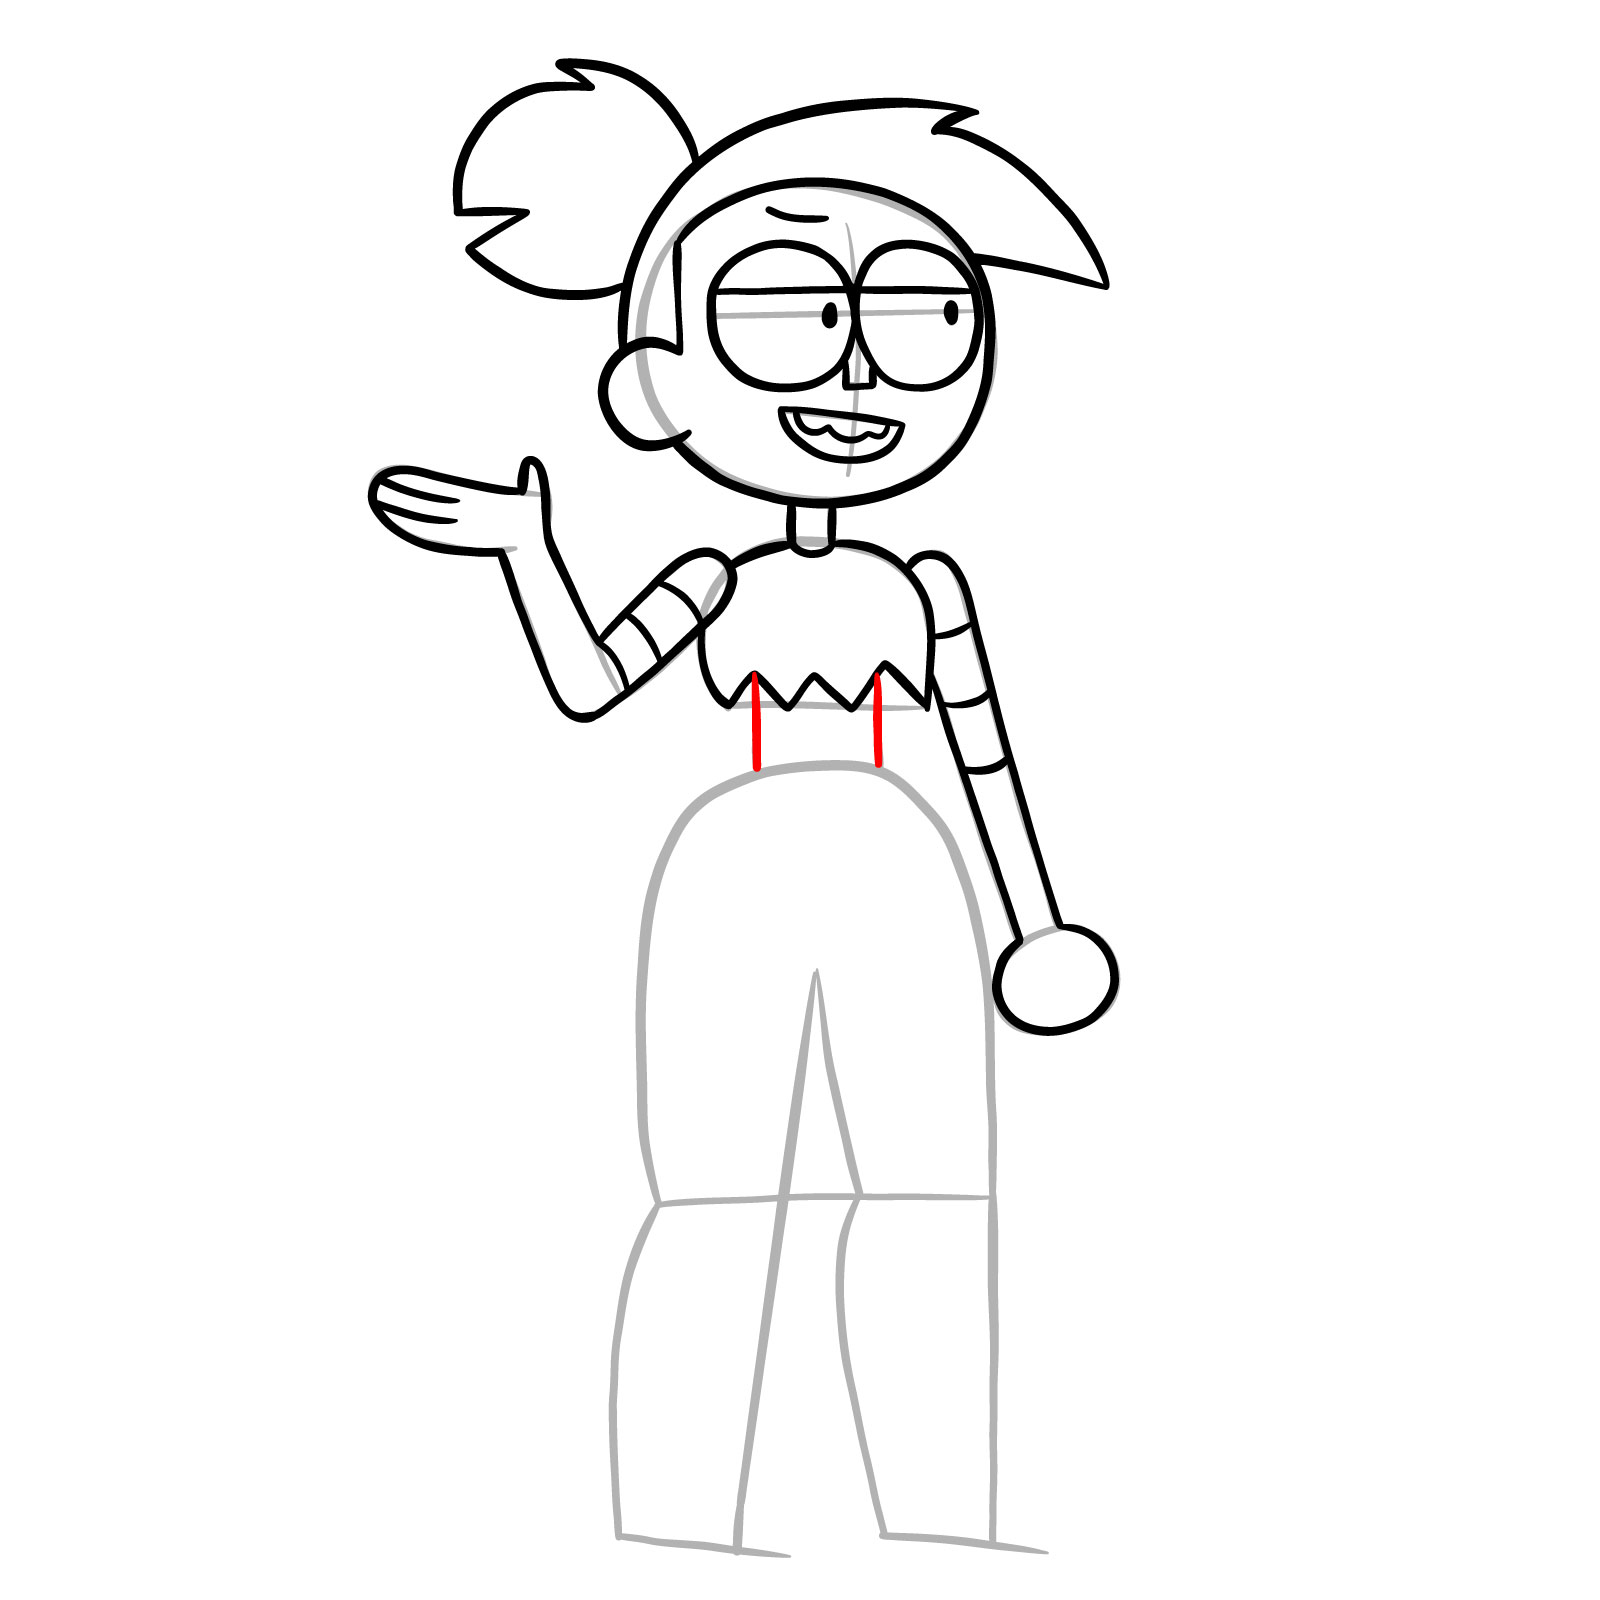 How to draw Enid Mettle from OK K.O.! - step 19